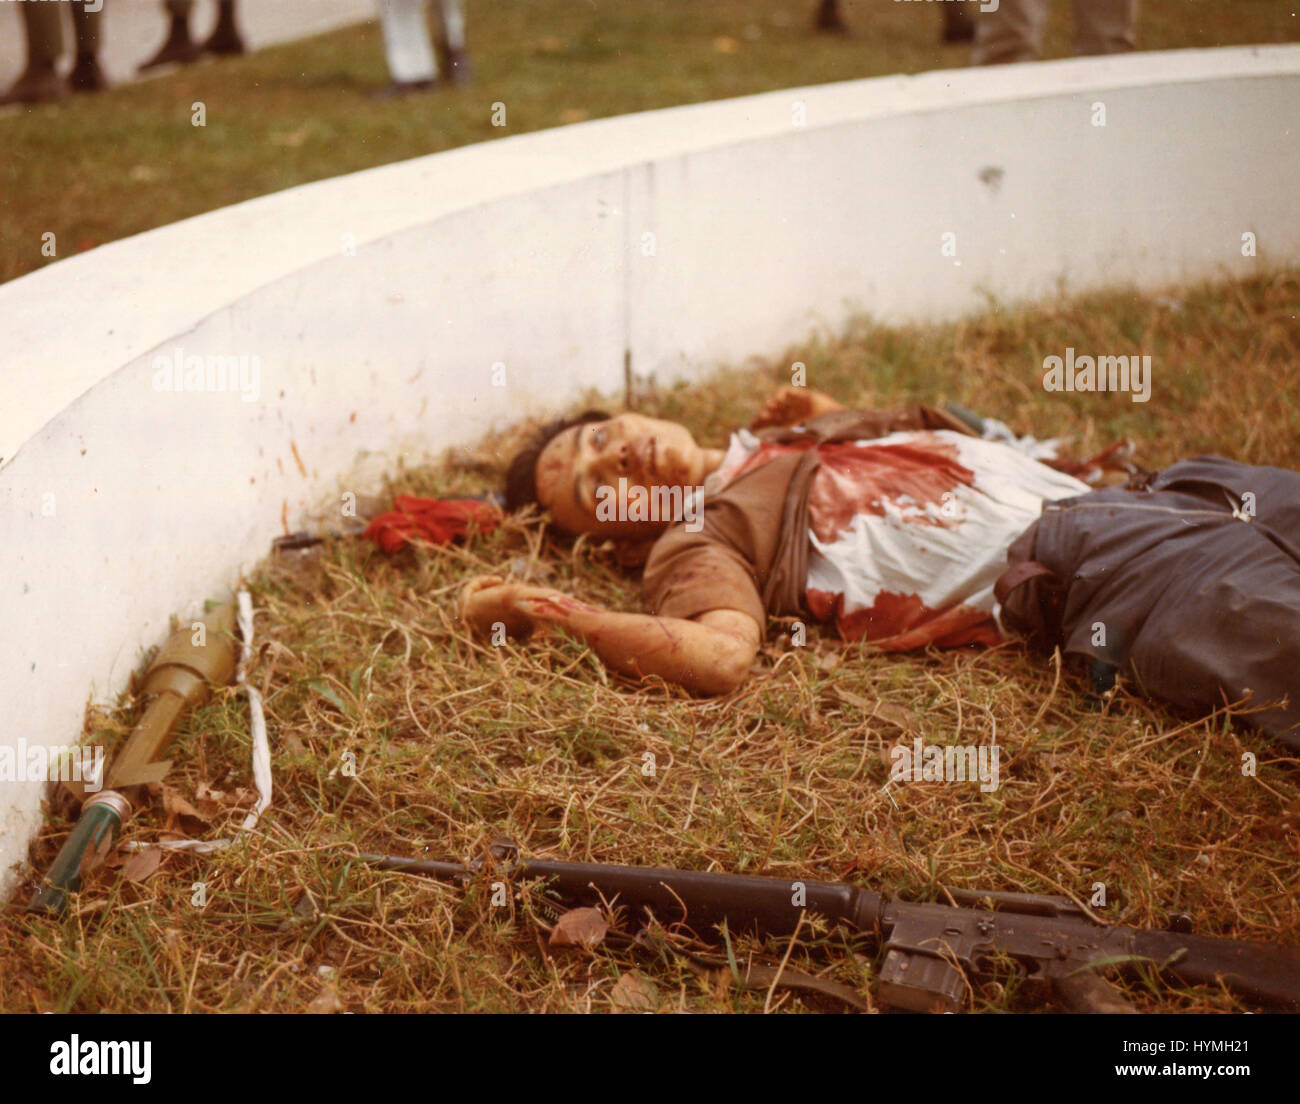 A dead Viet Cong with his weapons nearby lies on the grounds of the American embassy after the Tet attack. Saigon, Republic of Vietnam. 31 January 1968. Stock Photo